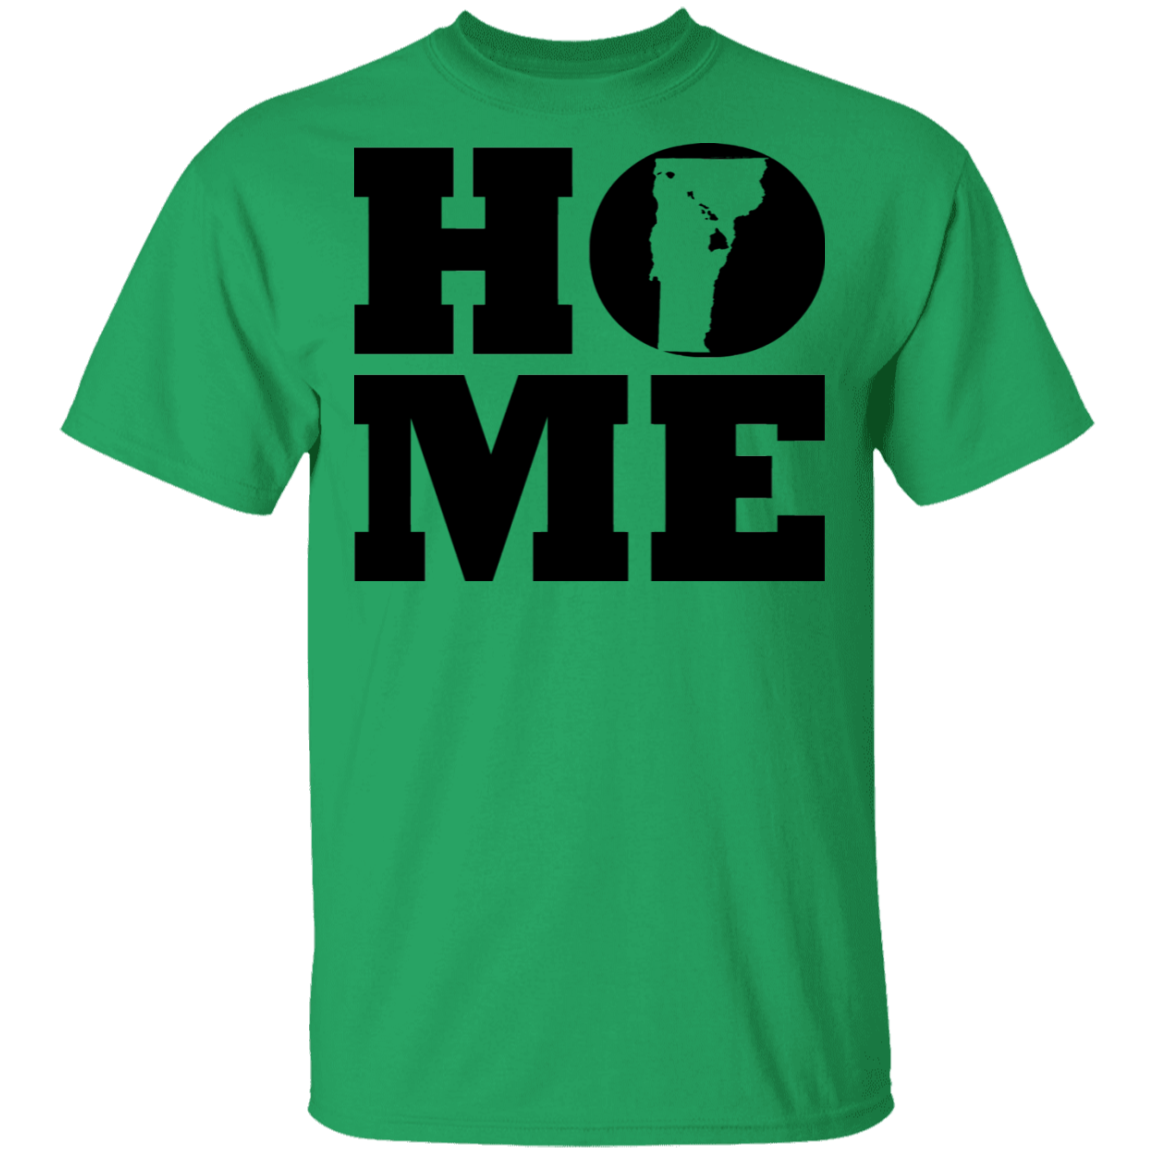 Home Roots Hawai'i and Vermont T-Shirt